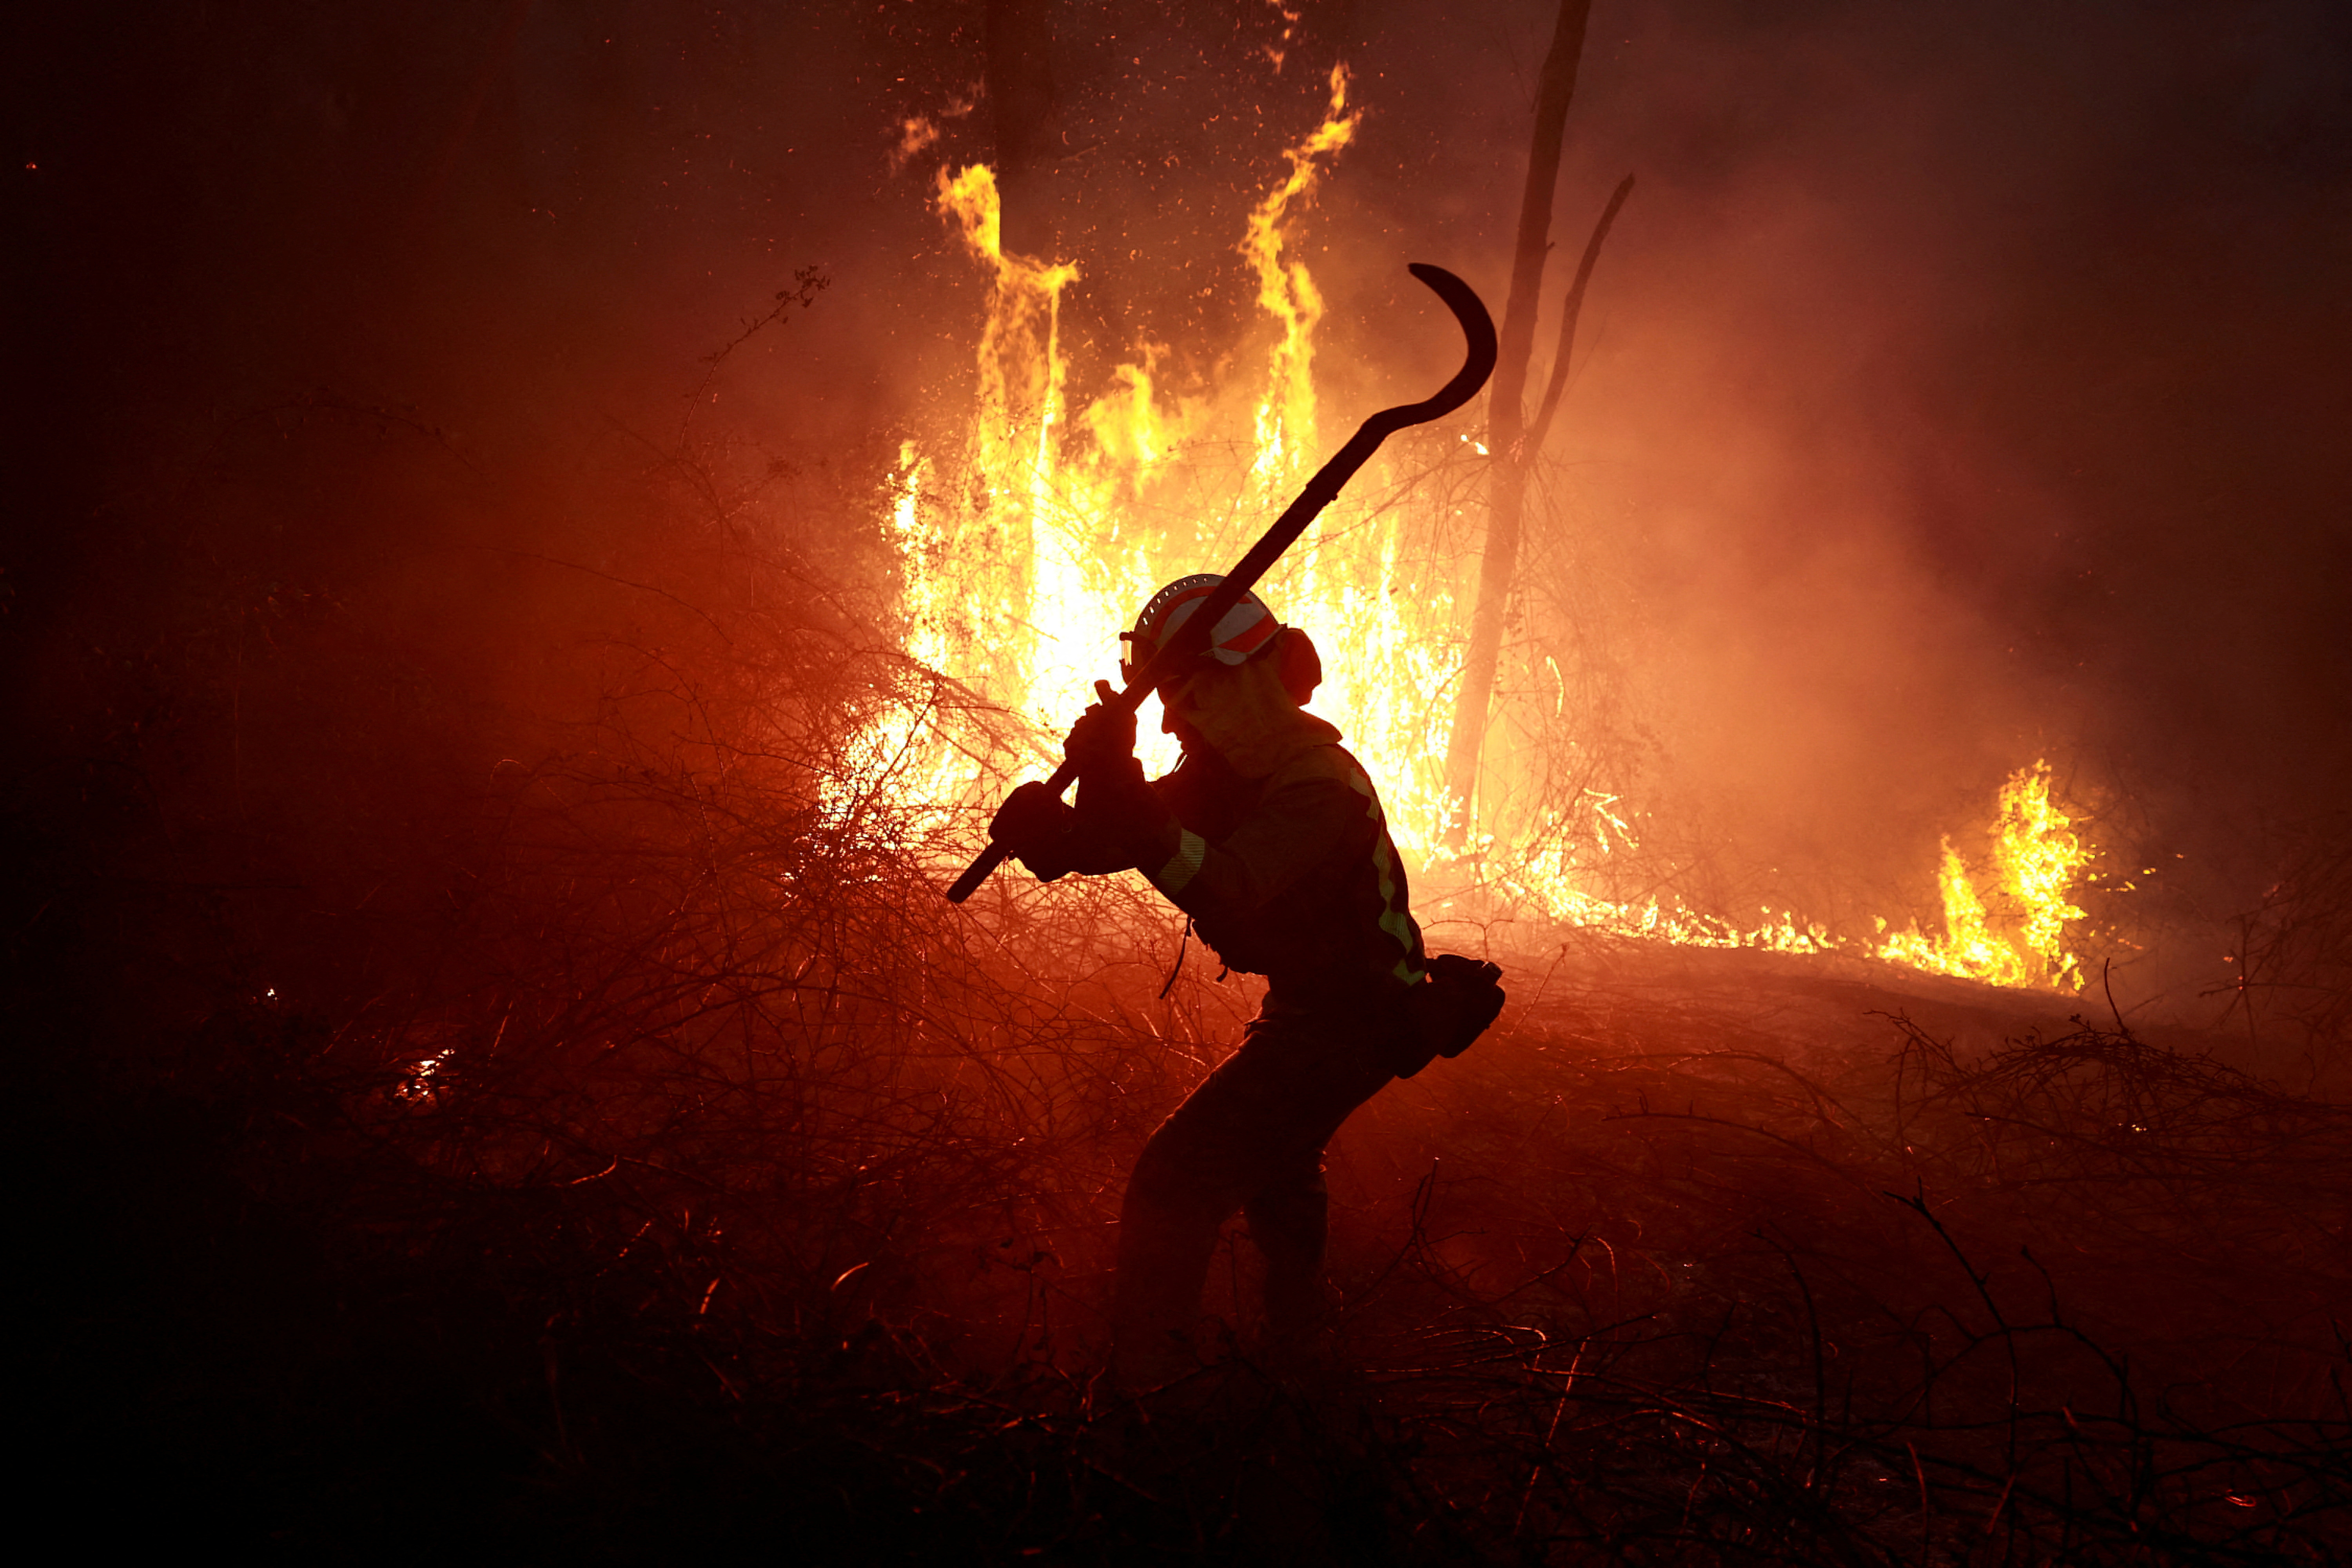 A firefighter from Galicia tackles a forest blaze near the Asturian village of Piedrafita